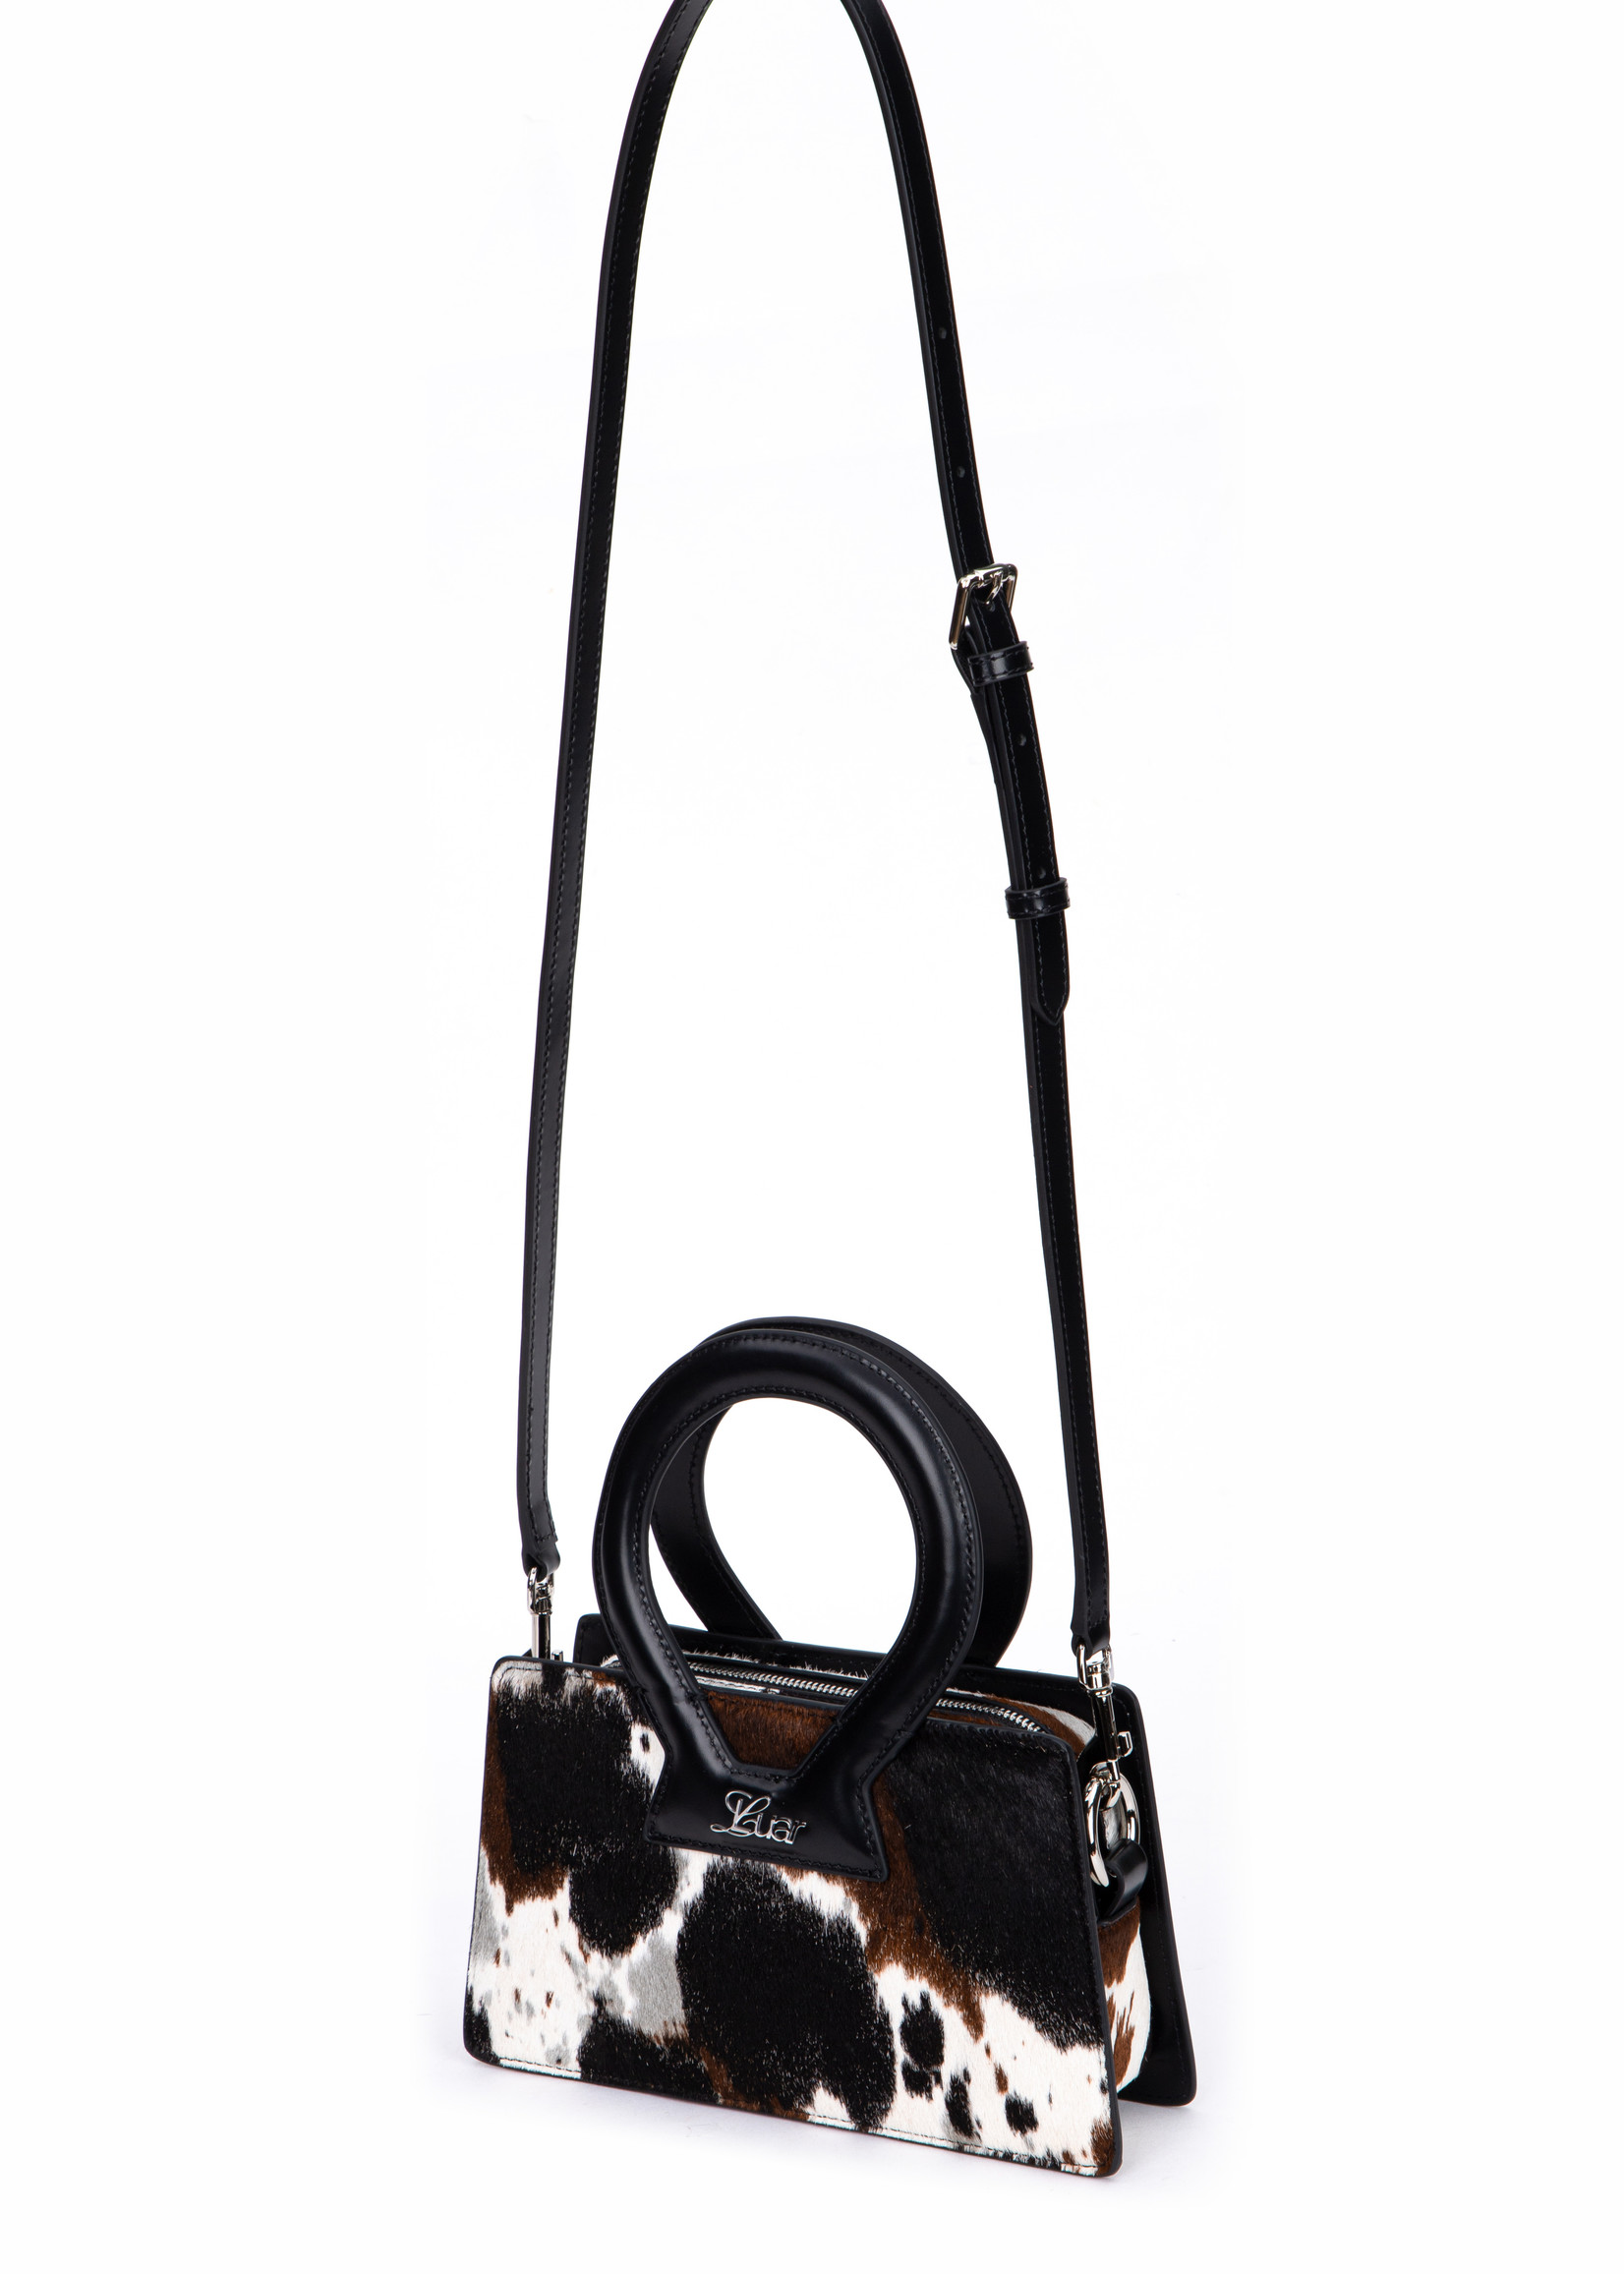 LUAR SMALL ANA BAG IN ABSTRACT COW PRINT PONY HAIR